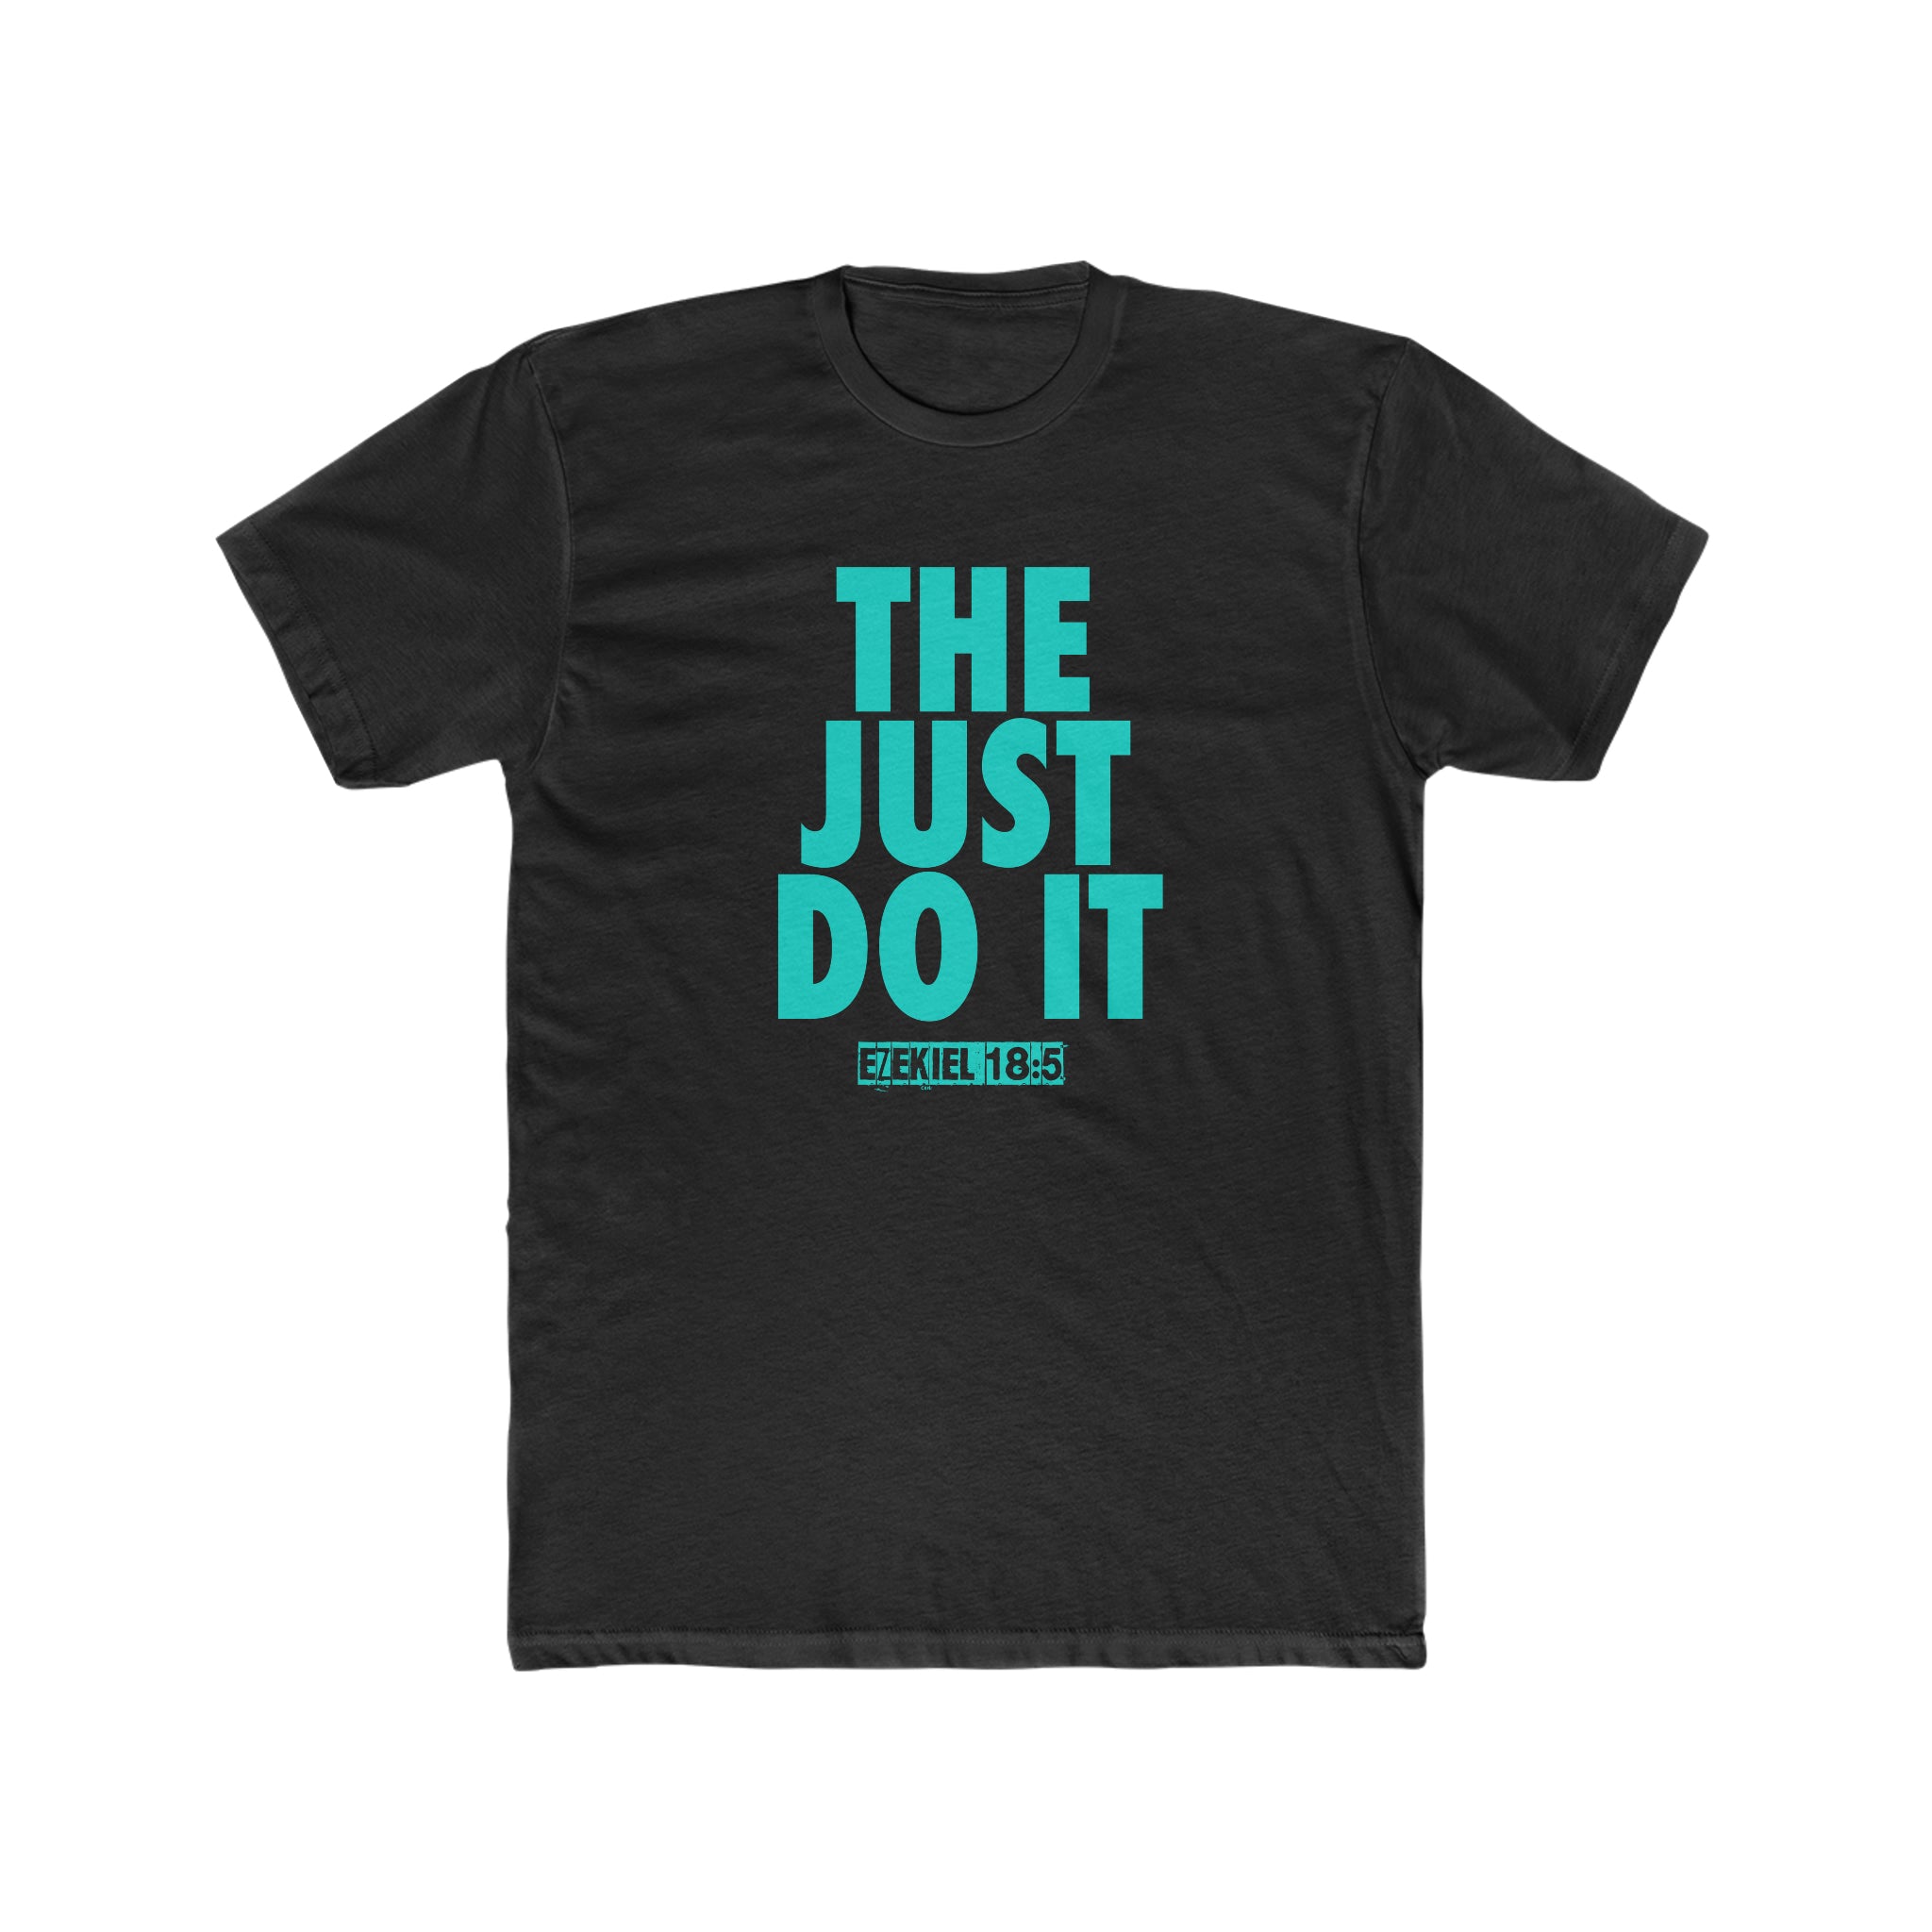 THE JUST DO IT TEAL